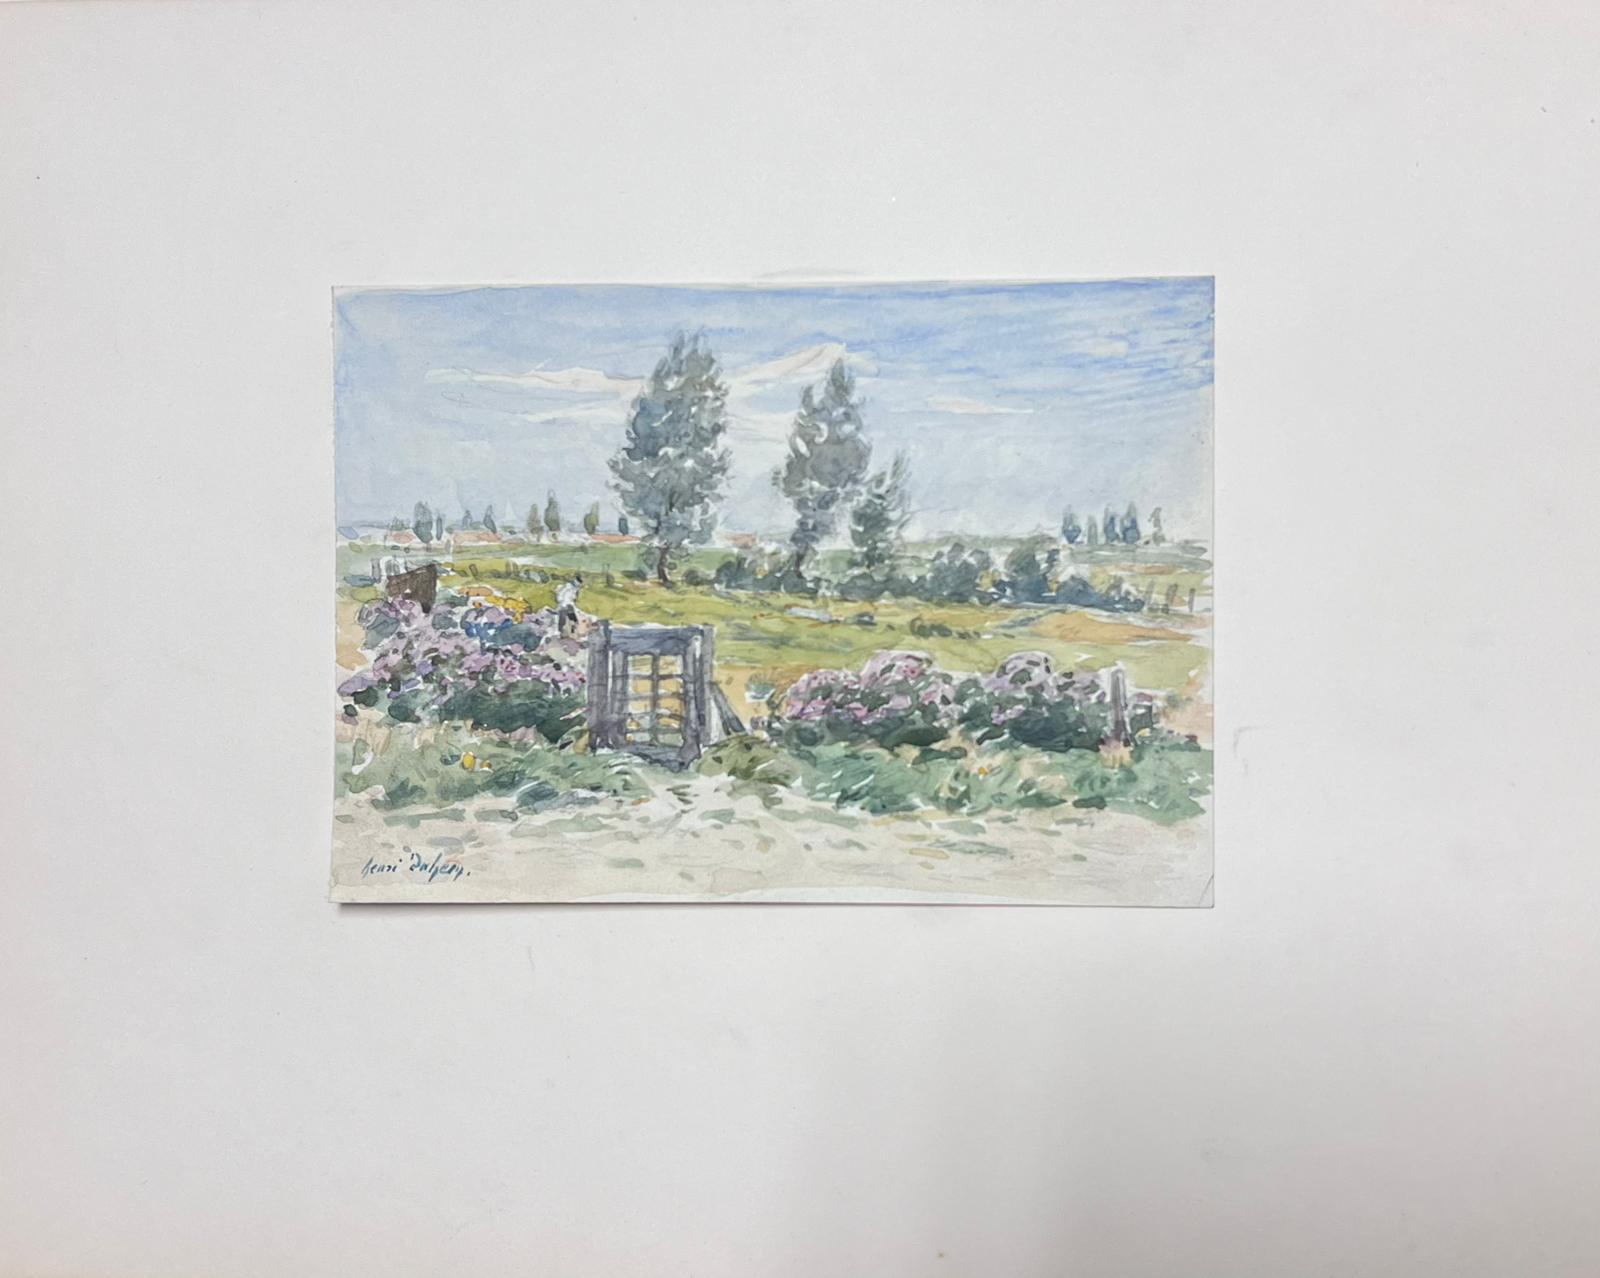 The artist: 
Henri Aime Duhem (1860-1941) French *see notes below, signed 

Title: The Country Landscape

Medium:  
signed gouache on paper, loosely laid over card, unframed

card: 10 x 13 inches
painting: 5 x 6.5 inches

Provenance: 
private